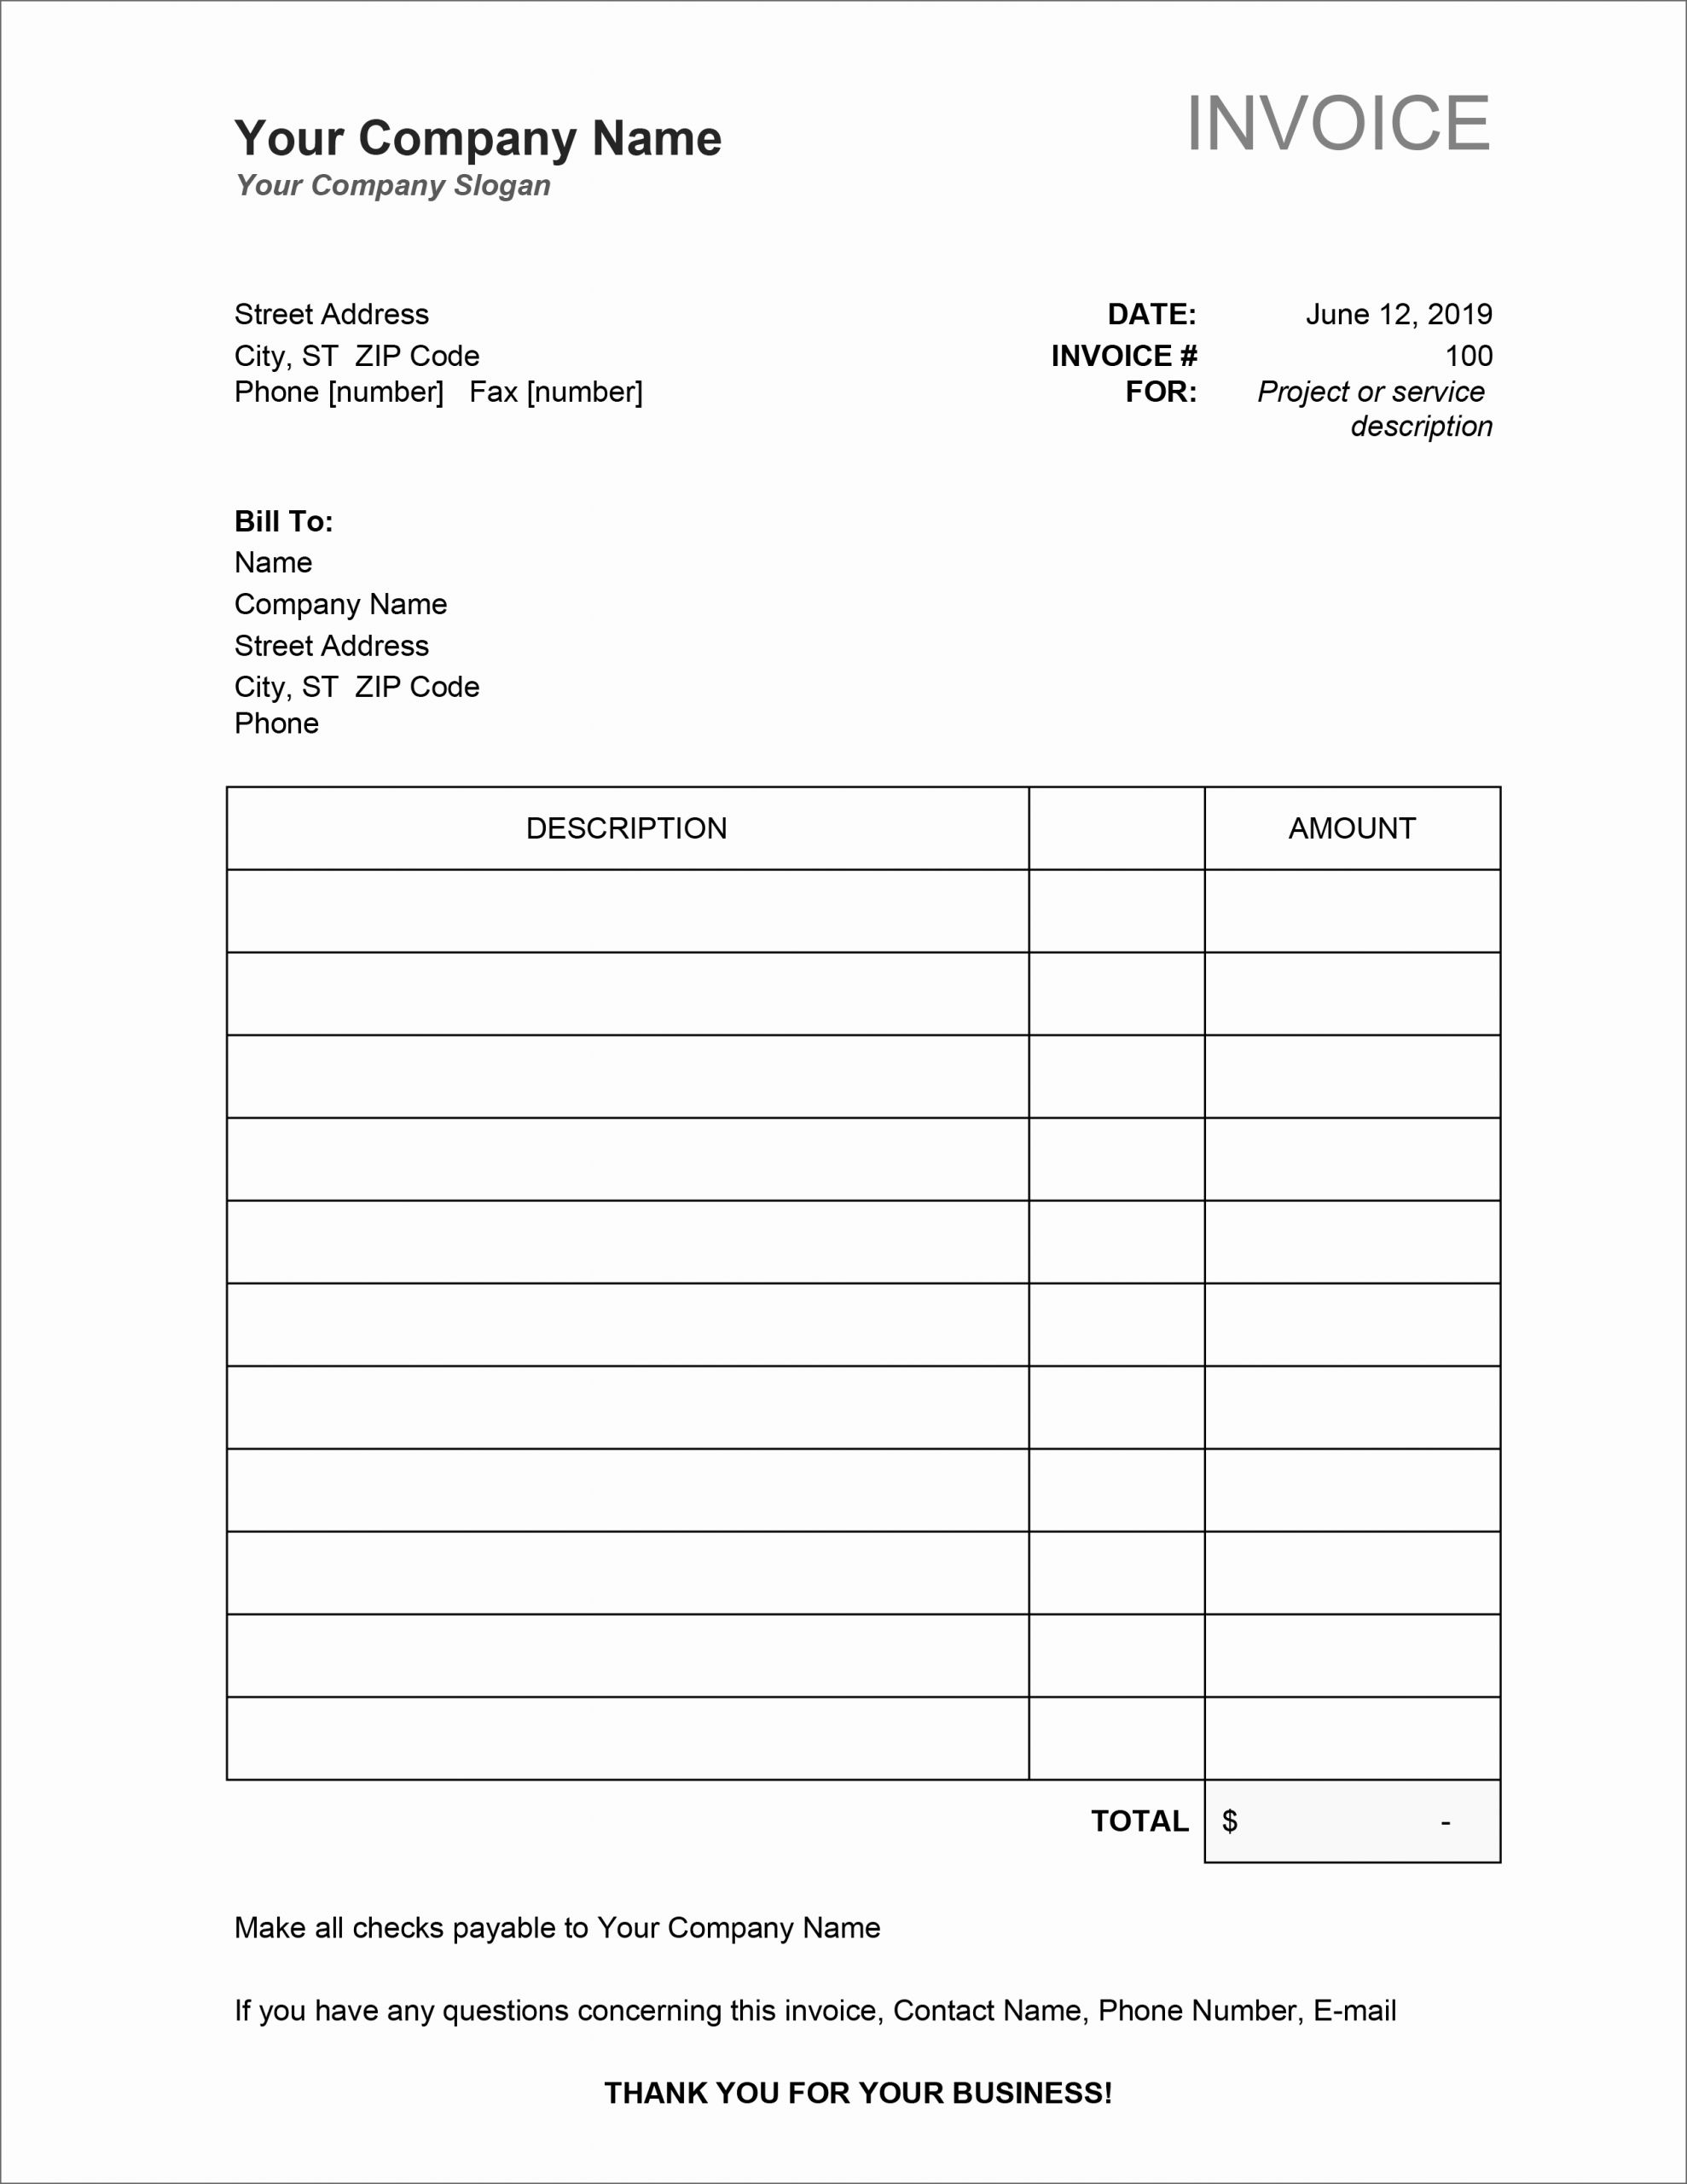 Excel Invoice Template 2003 Fresh 32 Free Invoice Templates In Microsoft Excel and Docx formats